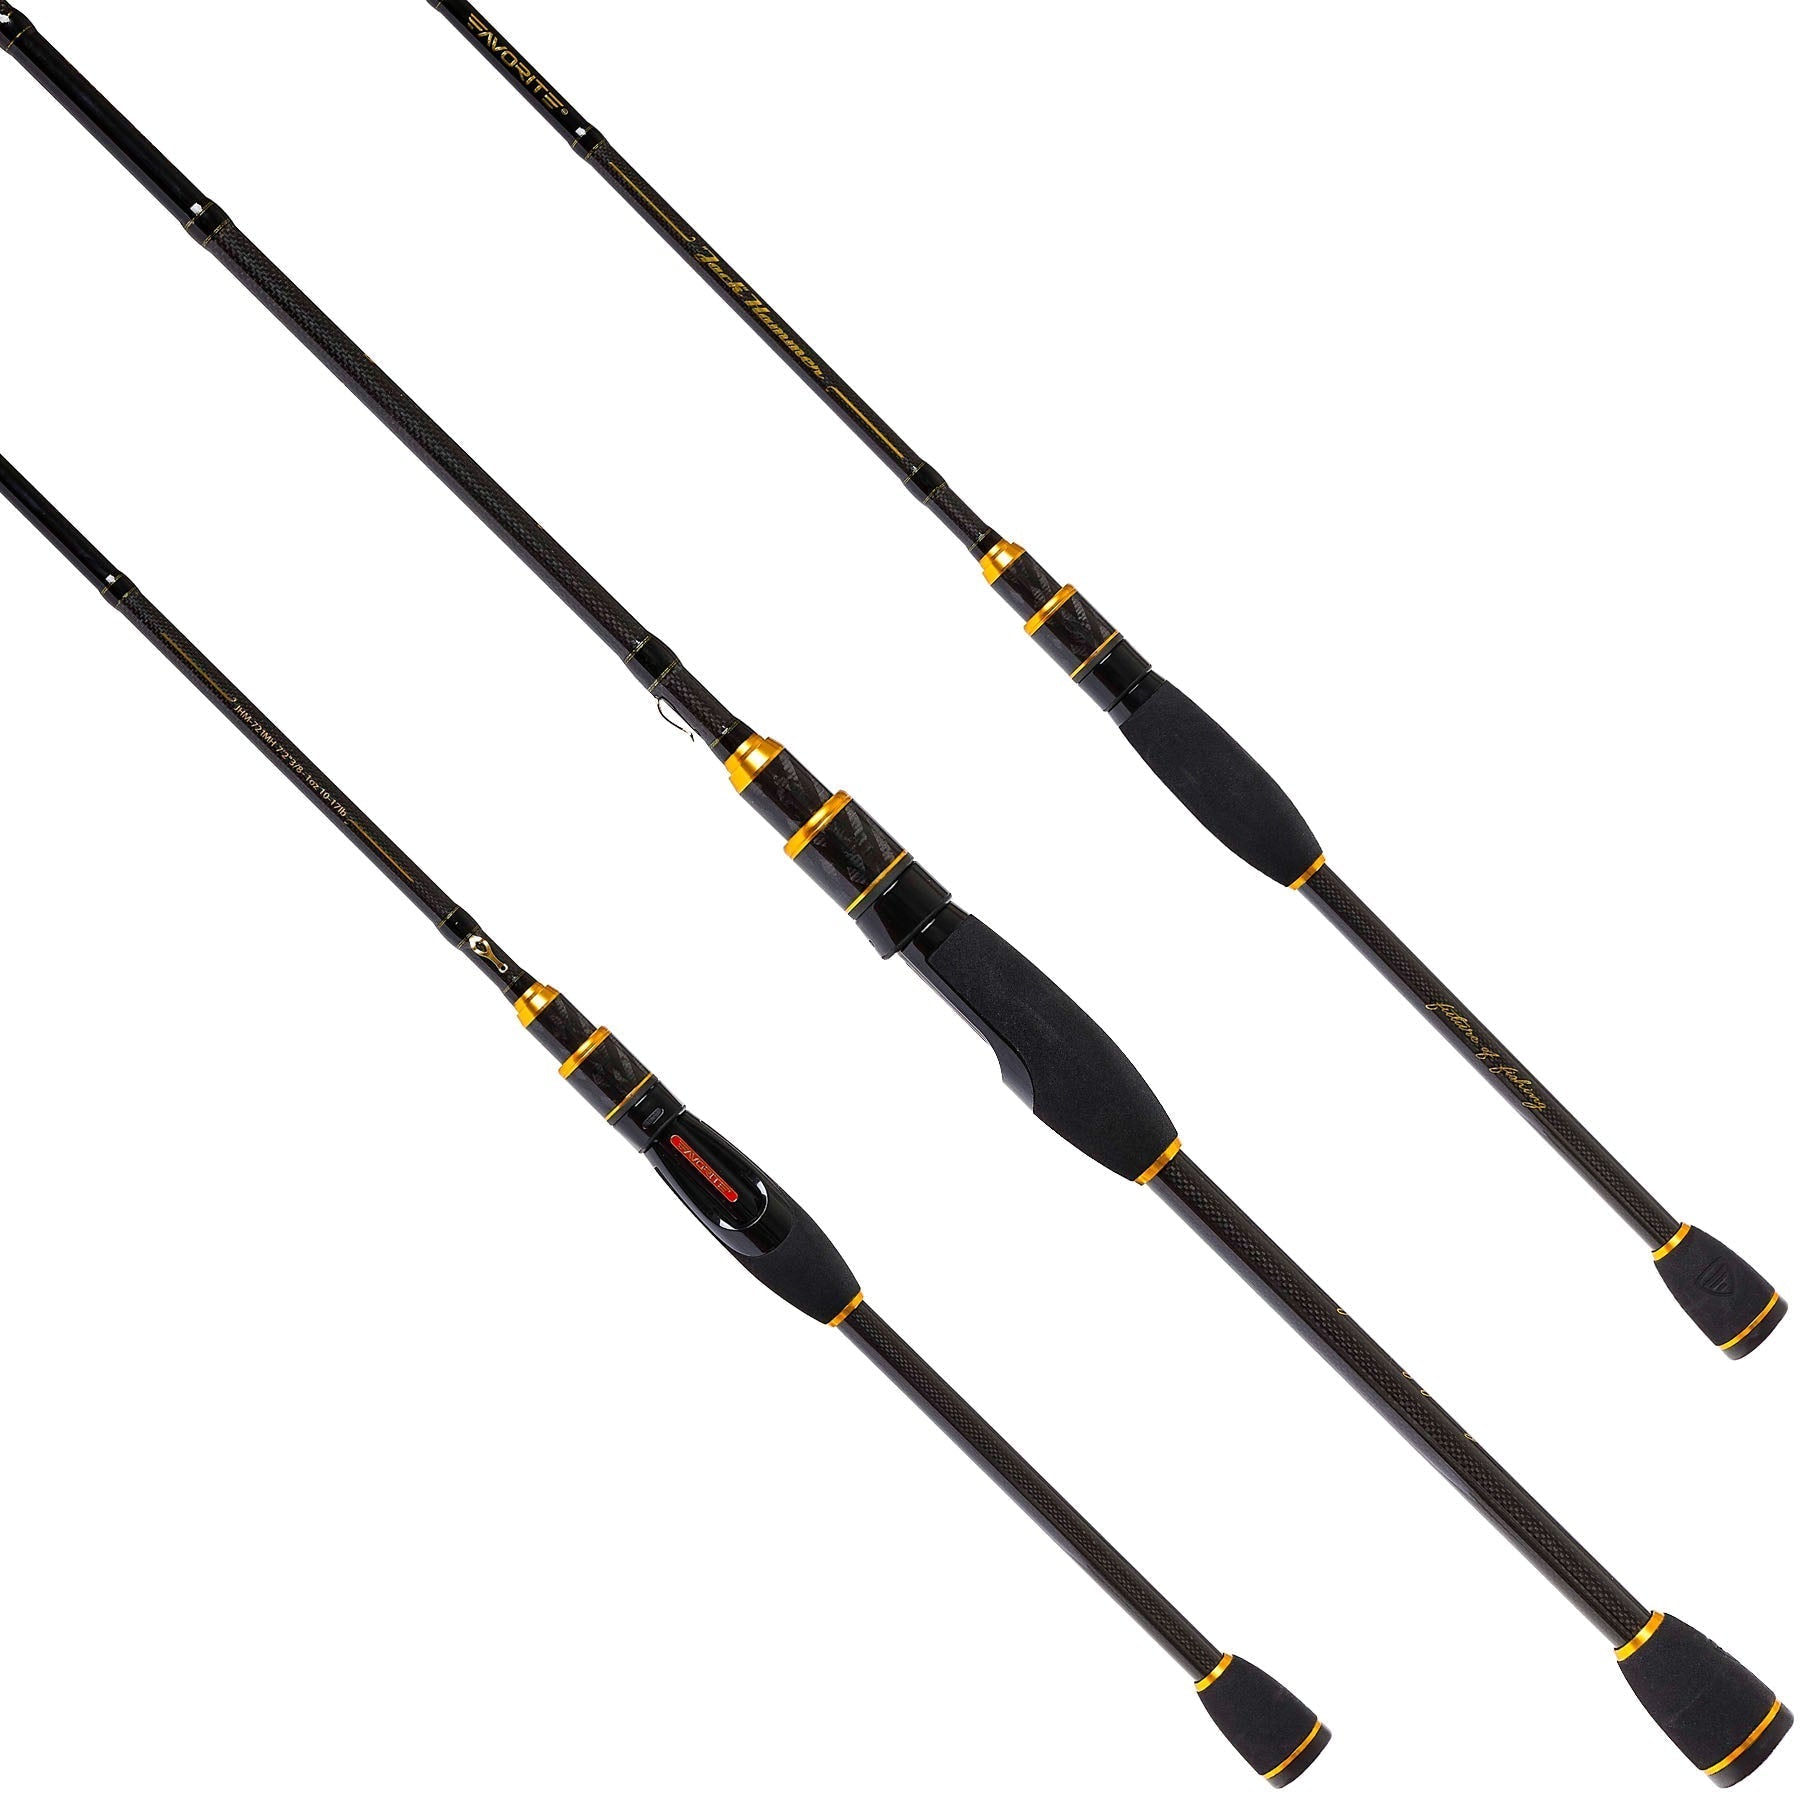 Discount Favorite Sick Stick 7 ft 1 in - Medium Heavy Spinning Rod for Sale, Online Fishing Rods Store